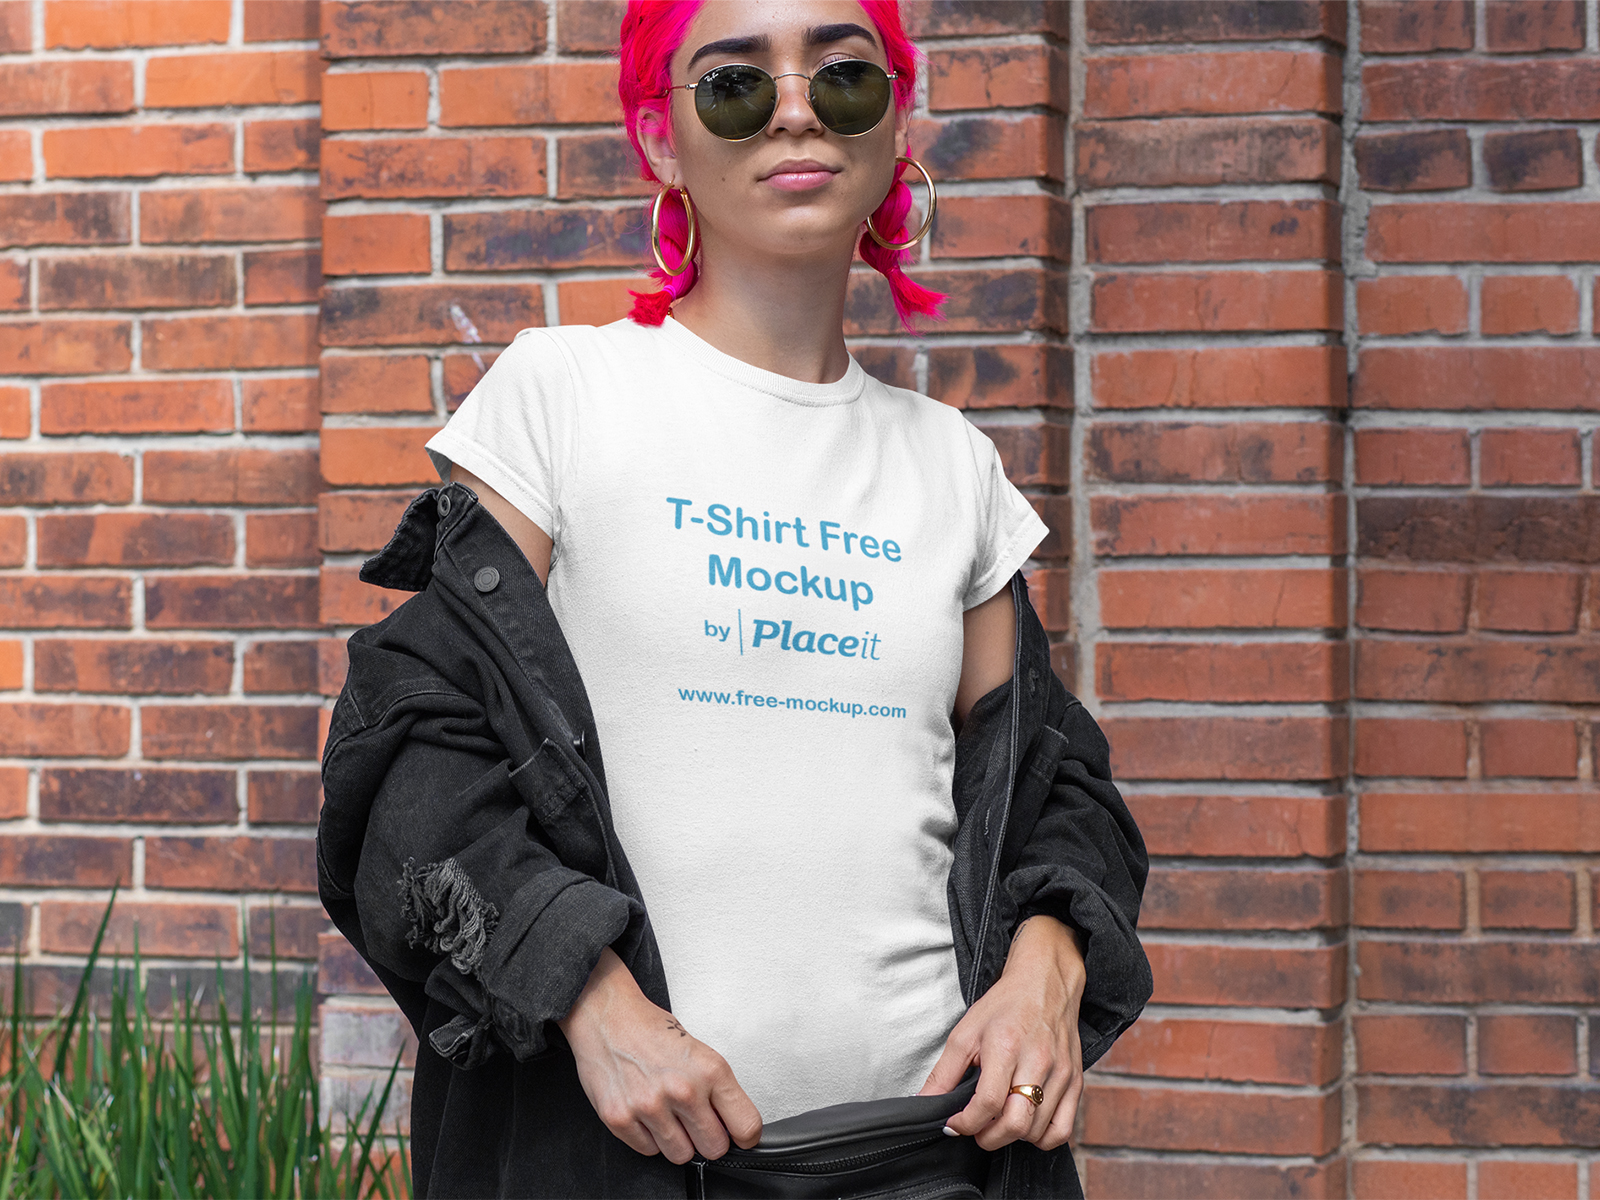 T-Shirt Online Free Mockup of a Woman with Pink Hair